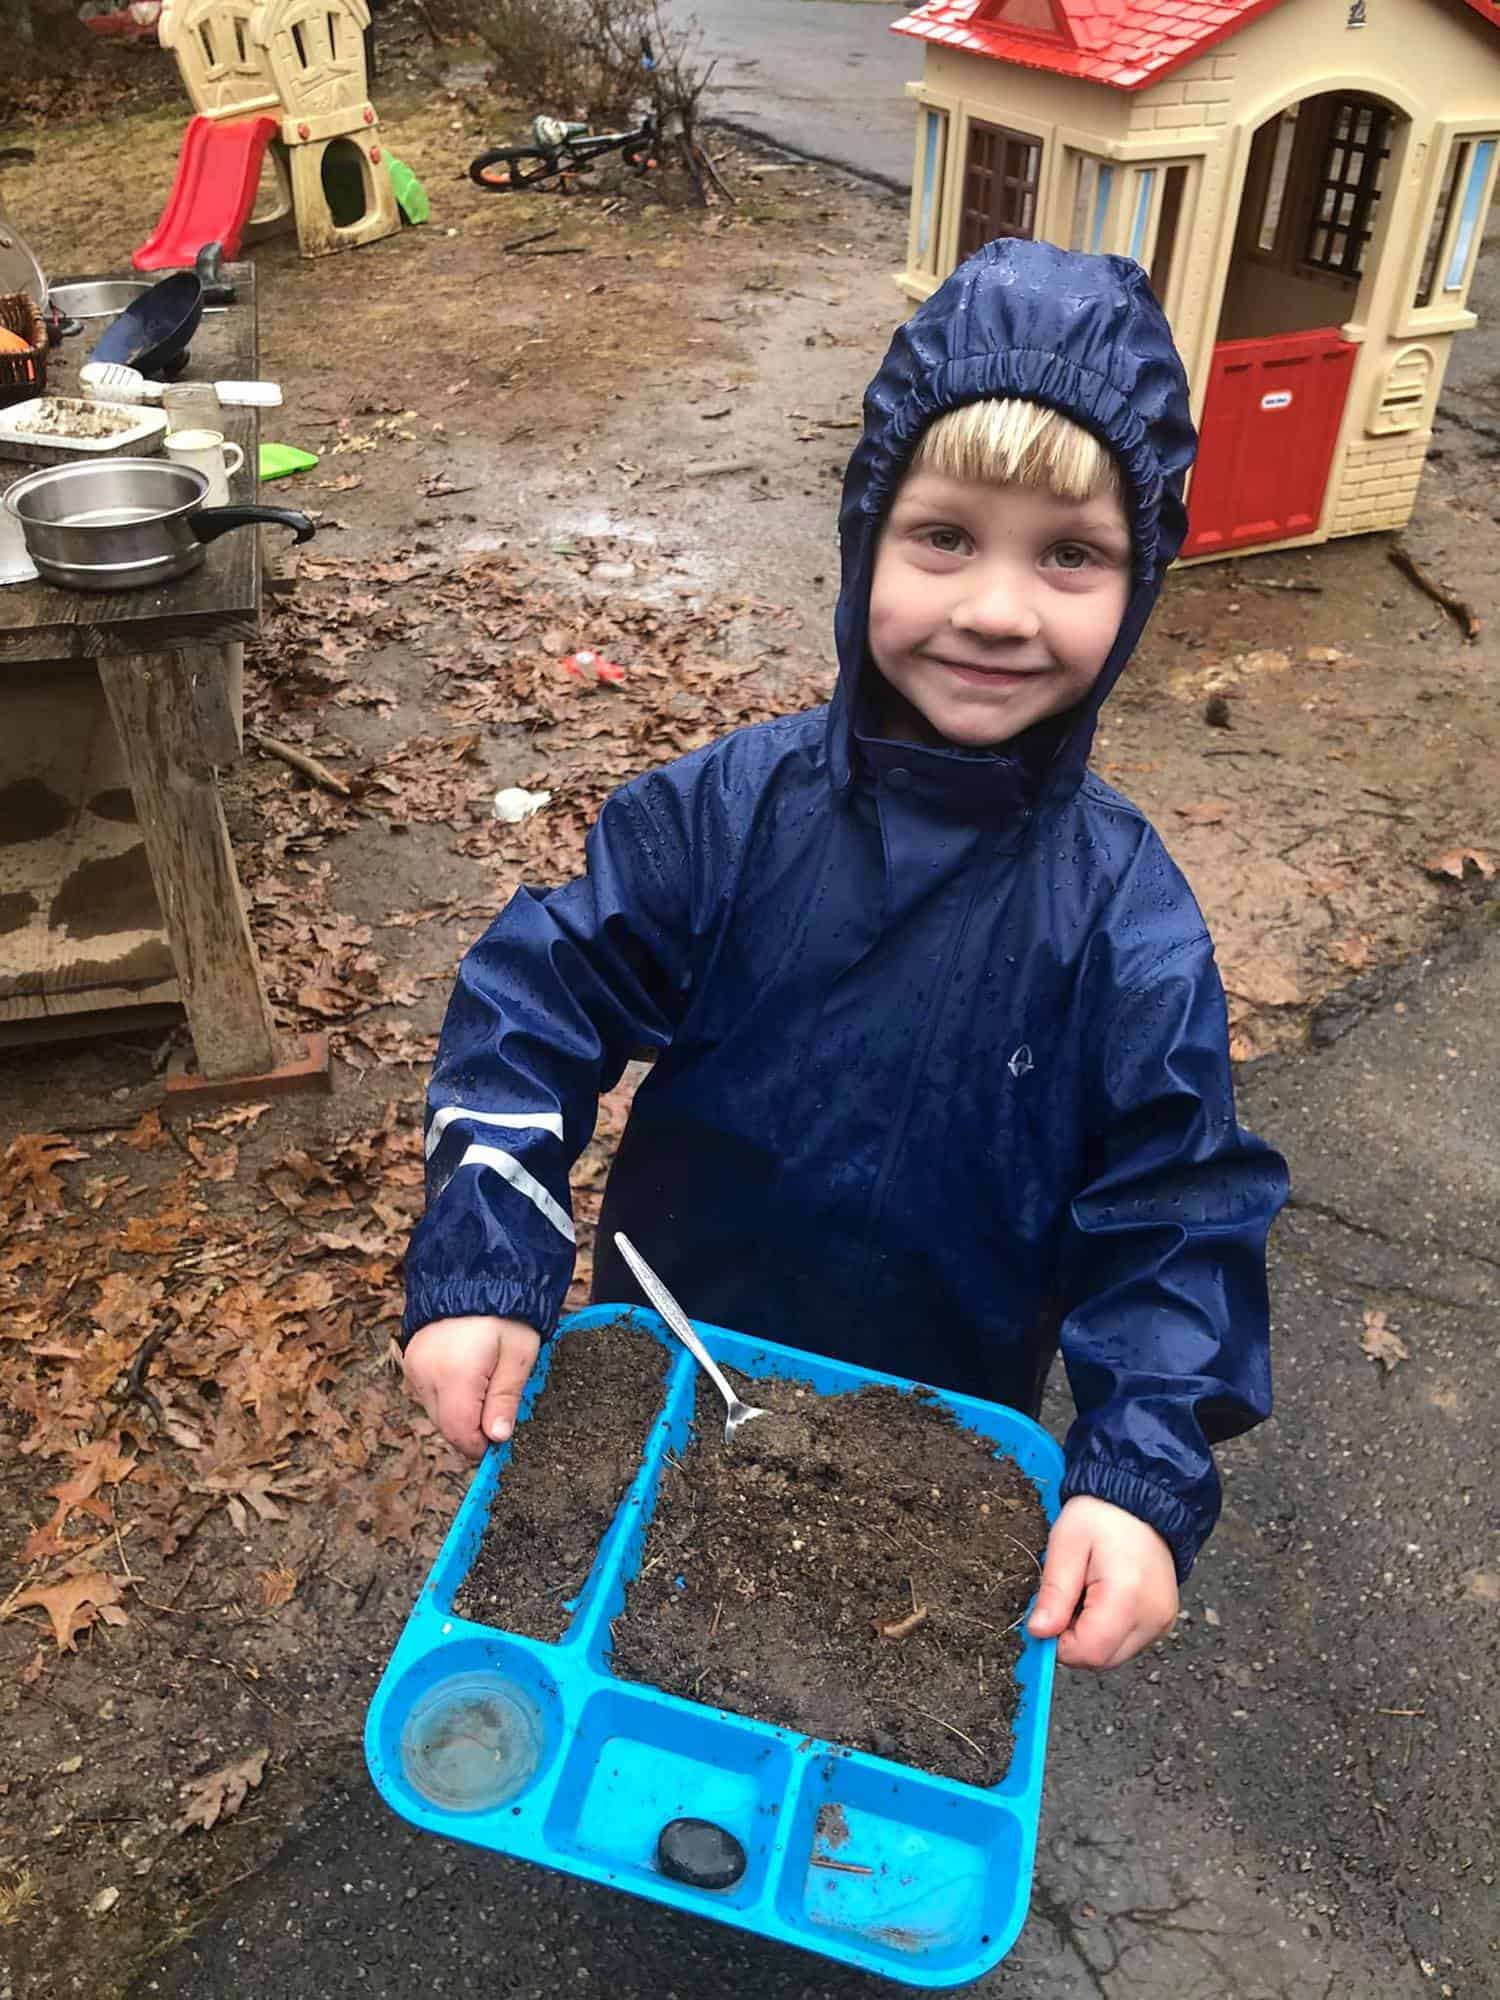 Rainy play - screen-free rain day outdoor activities for kids